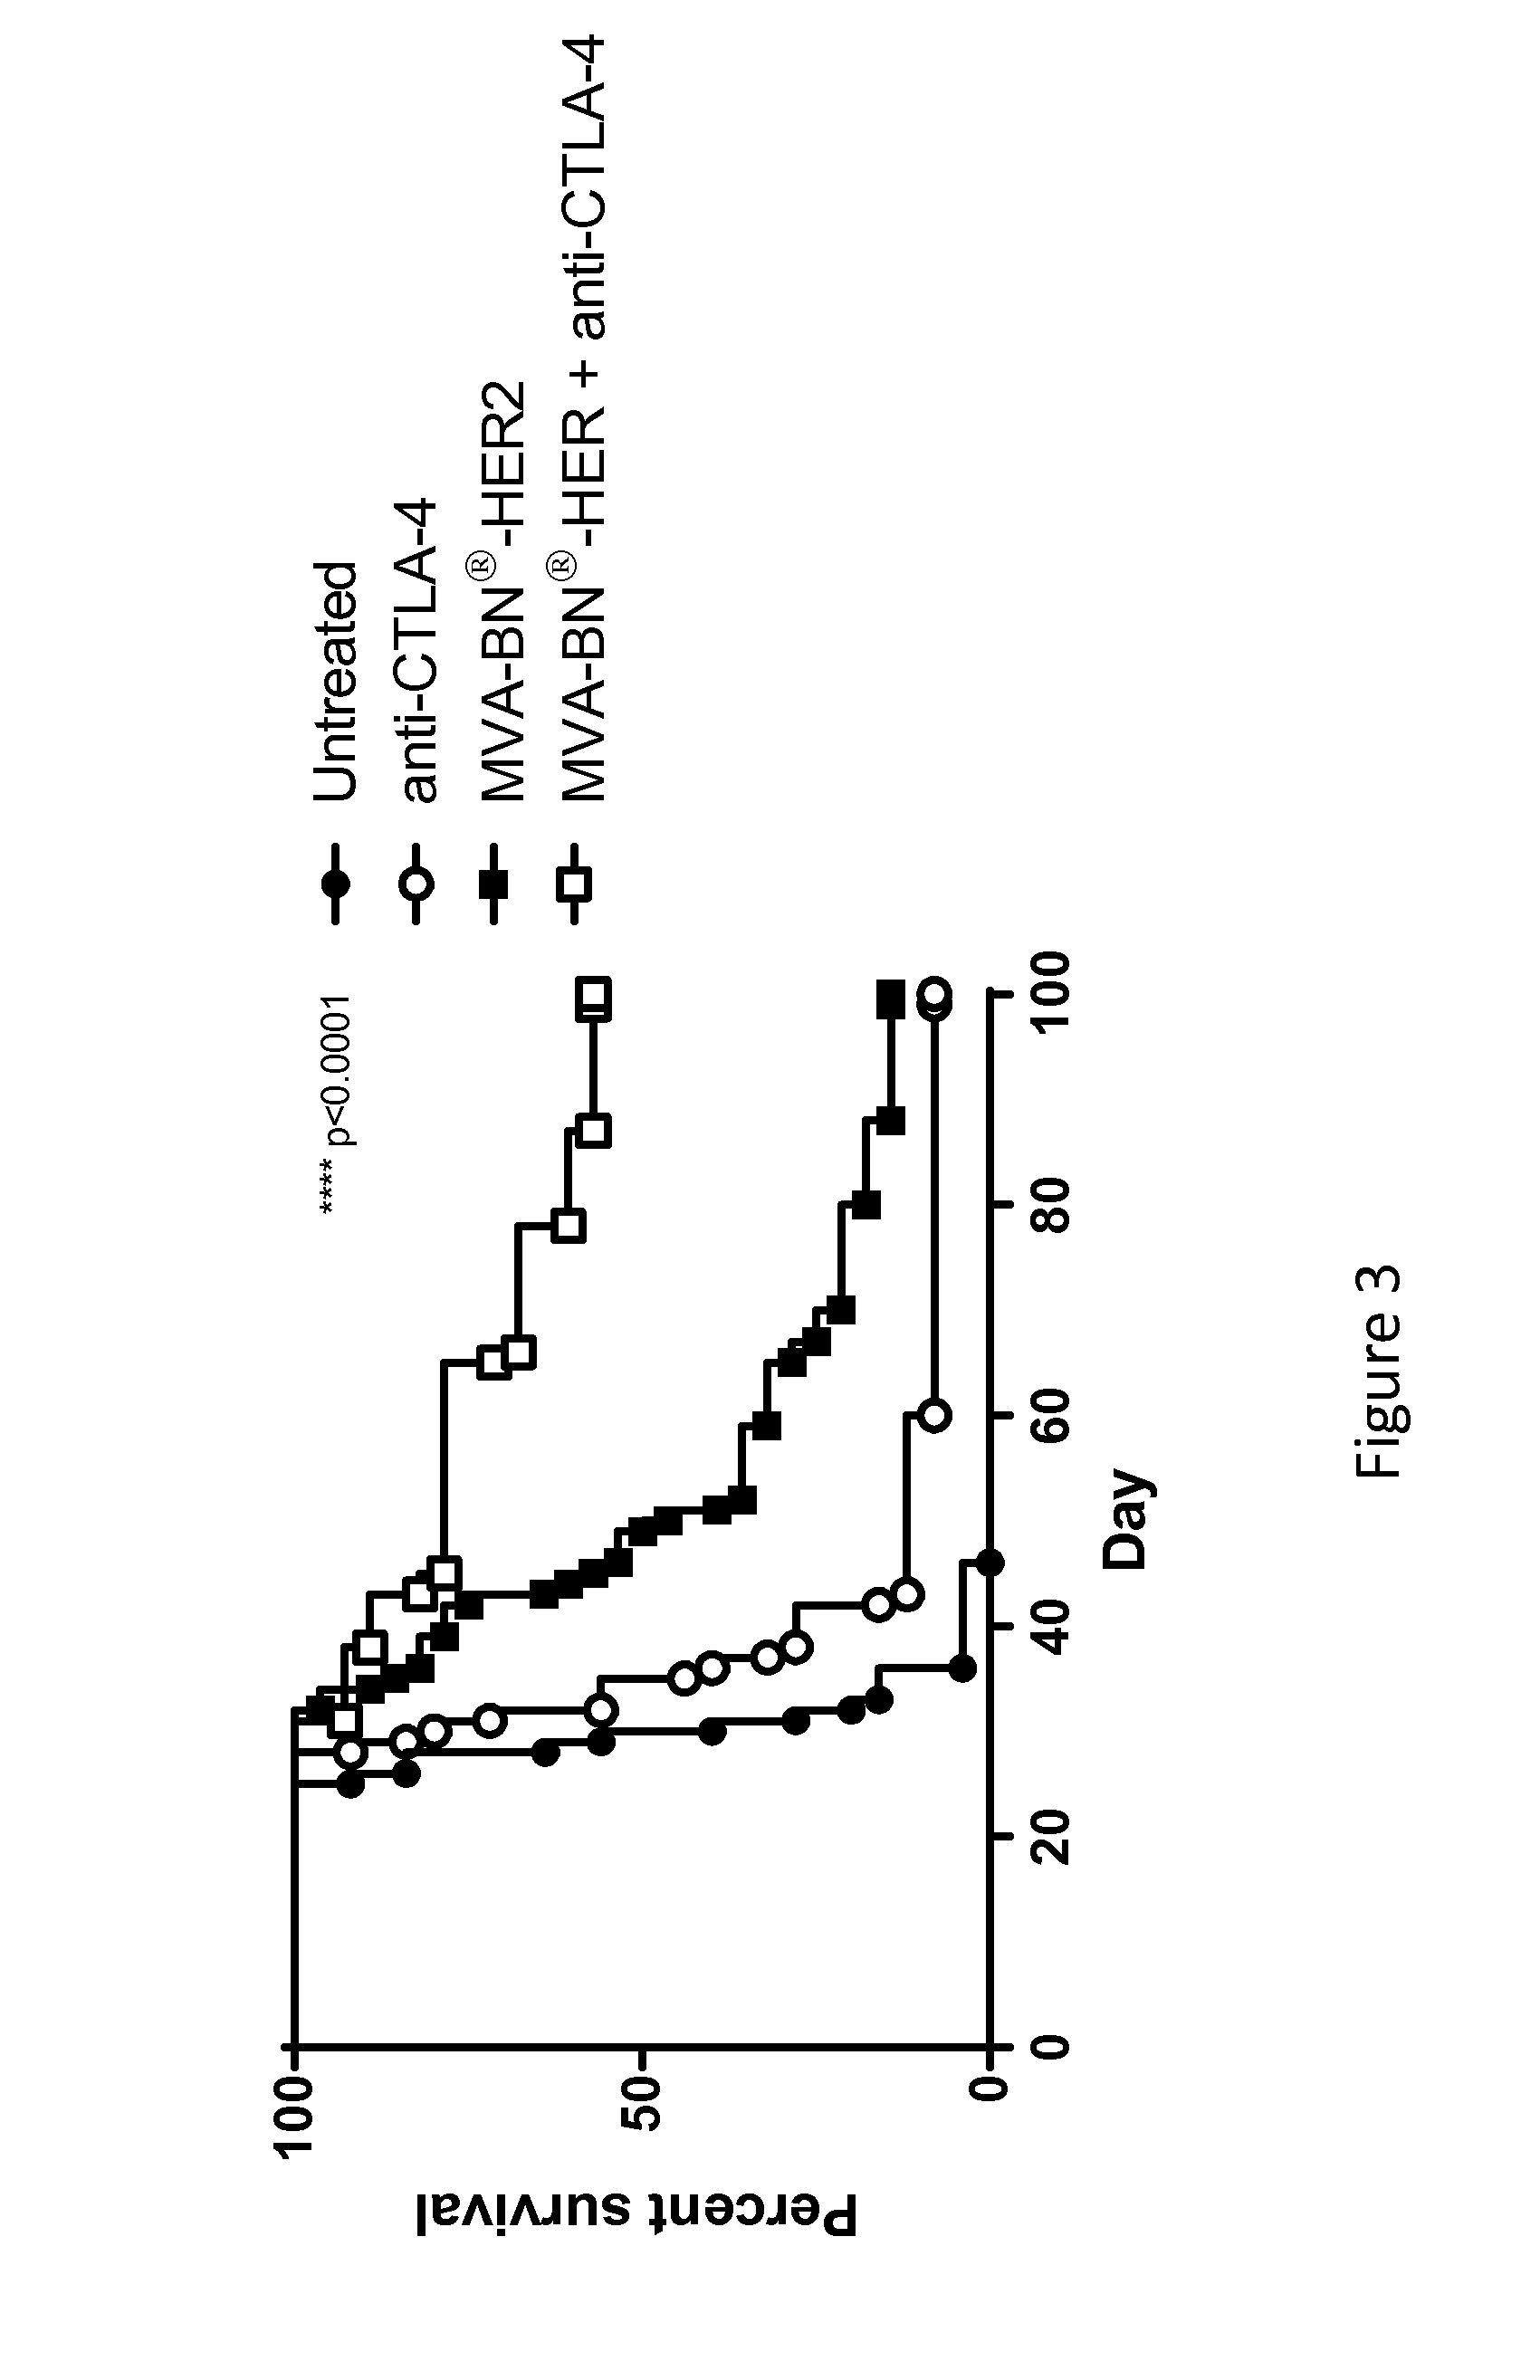 Combination Therapy for Treating Cancer with a Poxvirus Expressing a Tumor Antigen and an Antagonist and/or Agonist of an Immune Checkpoint Inhibitor